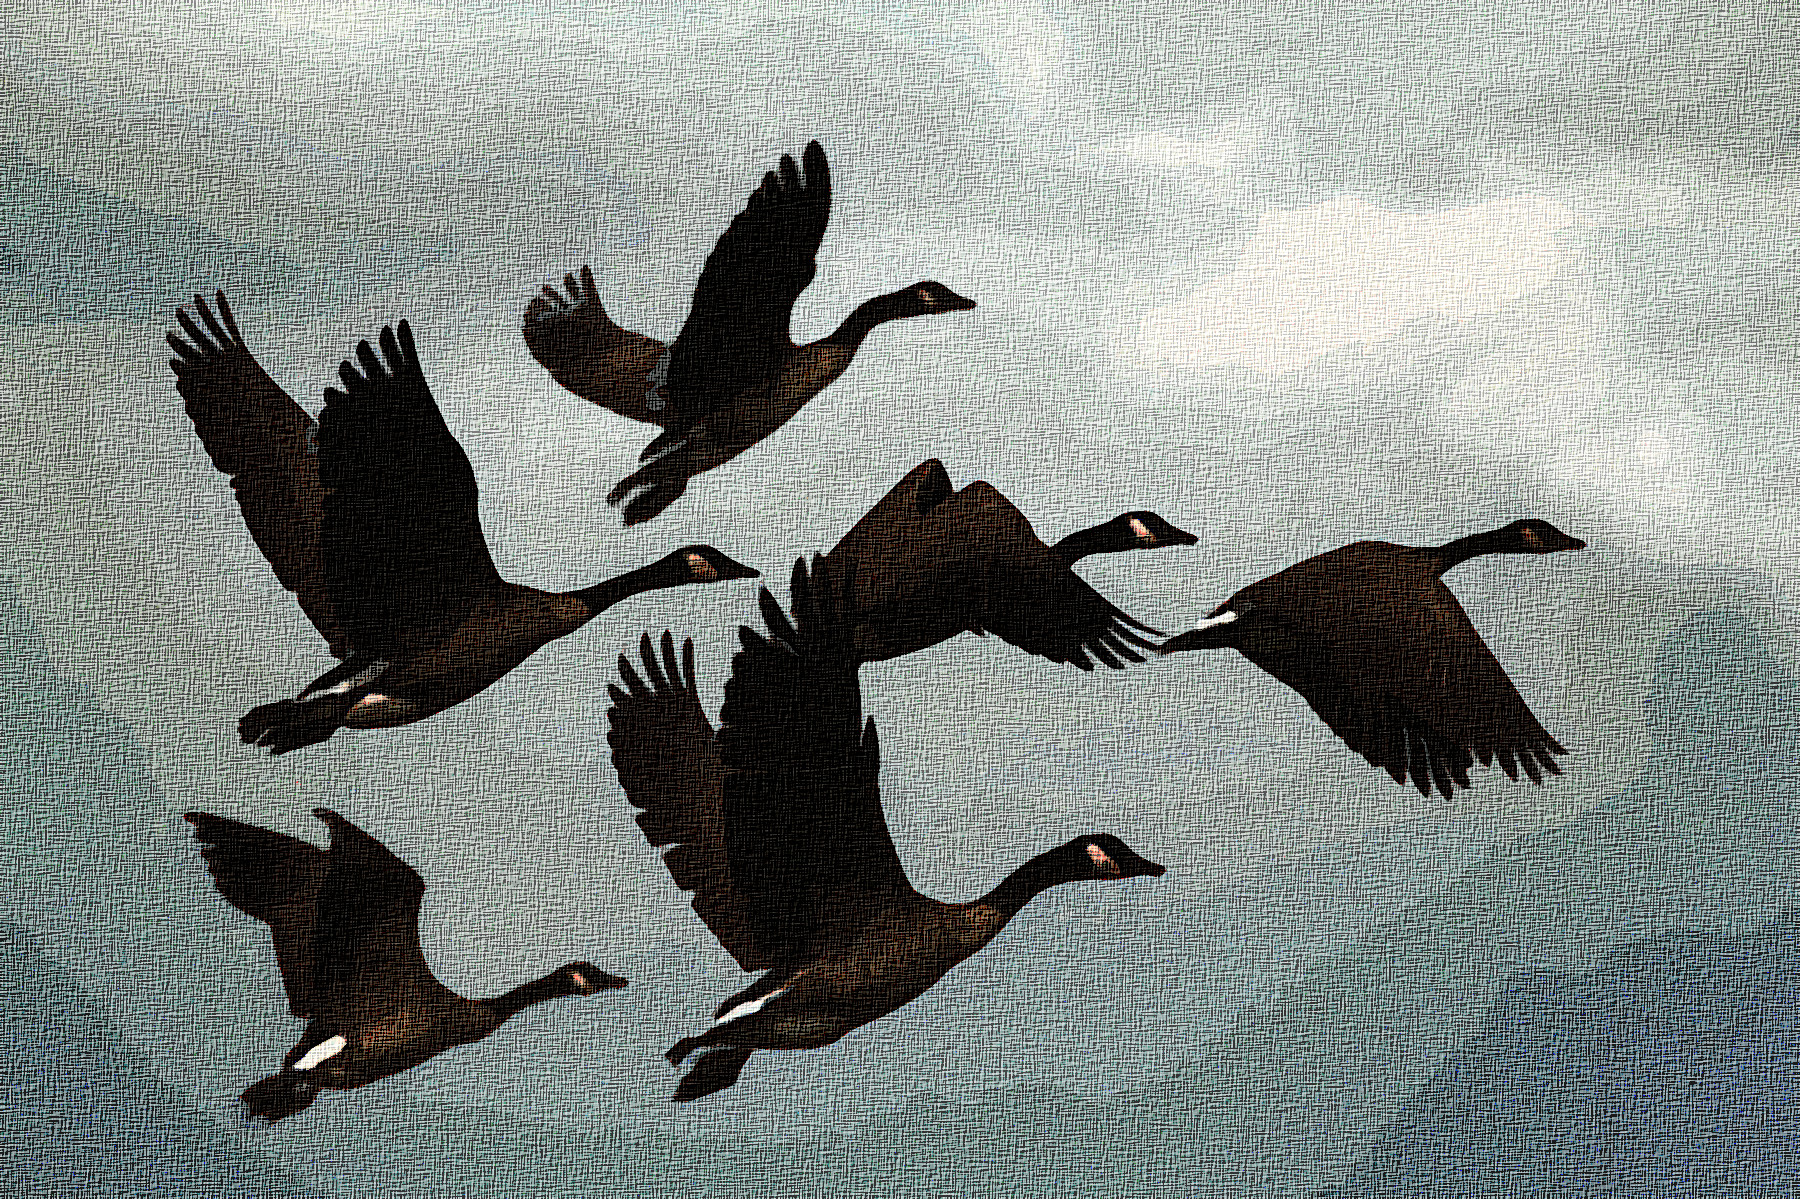 geese-1990202_Graphic_Effect_Illustration_Jvid_X2D.jpg